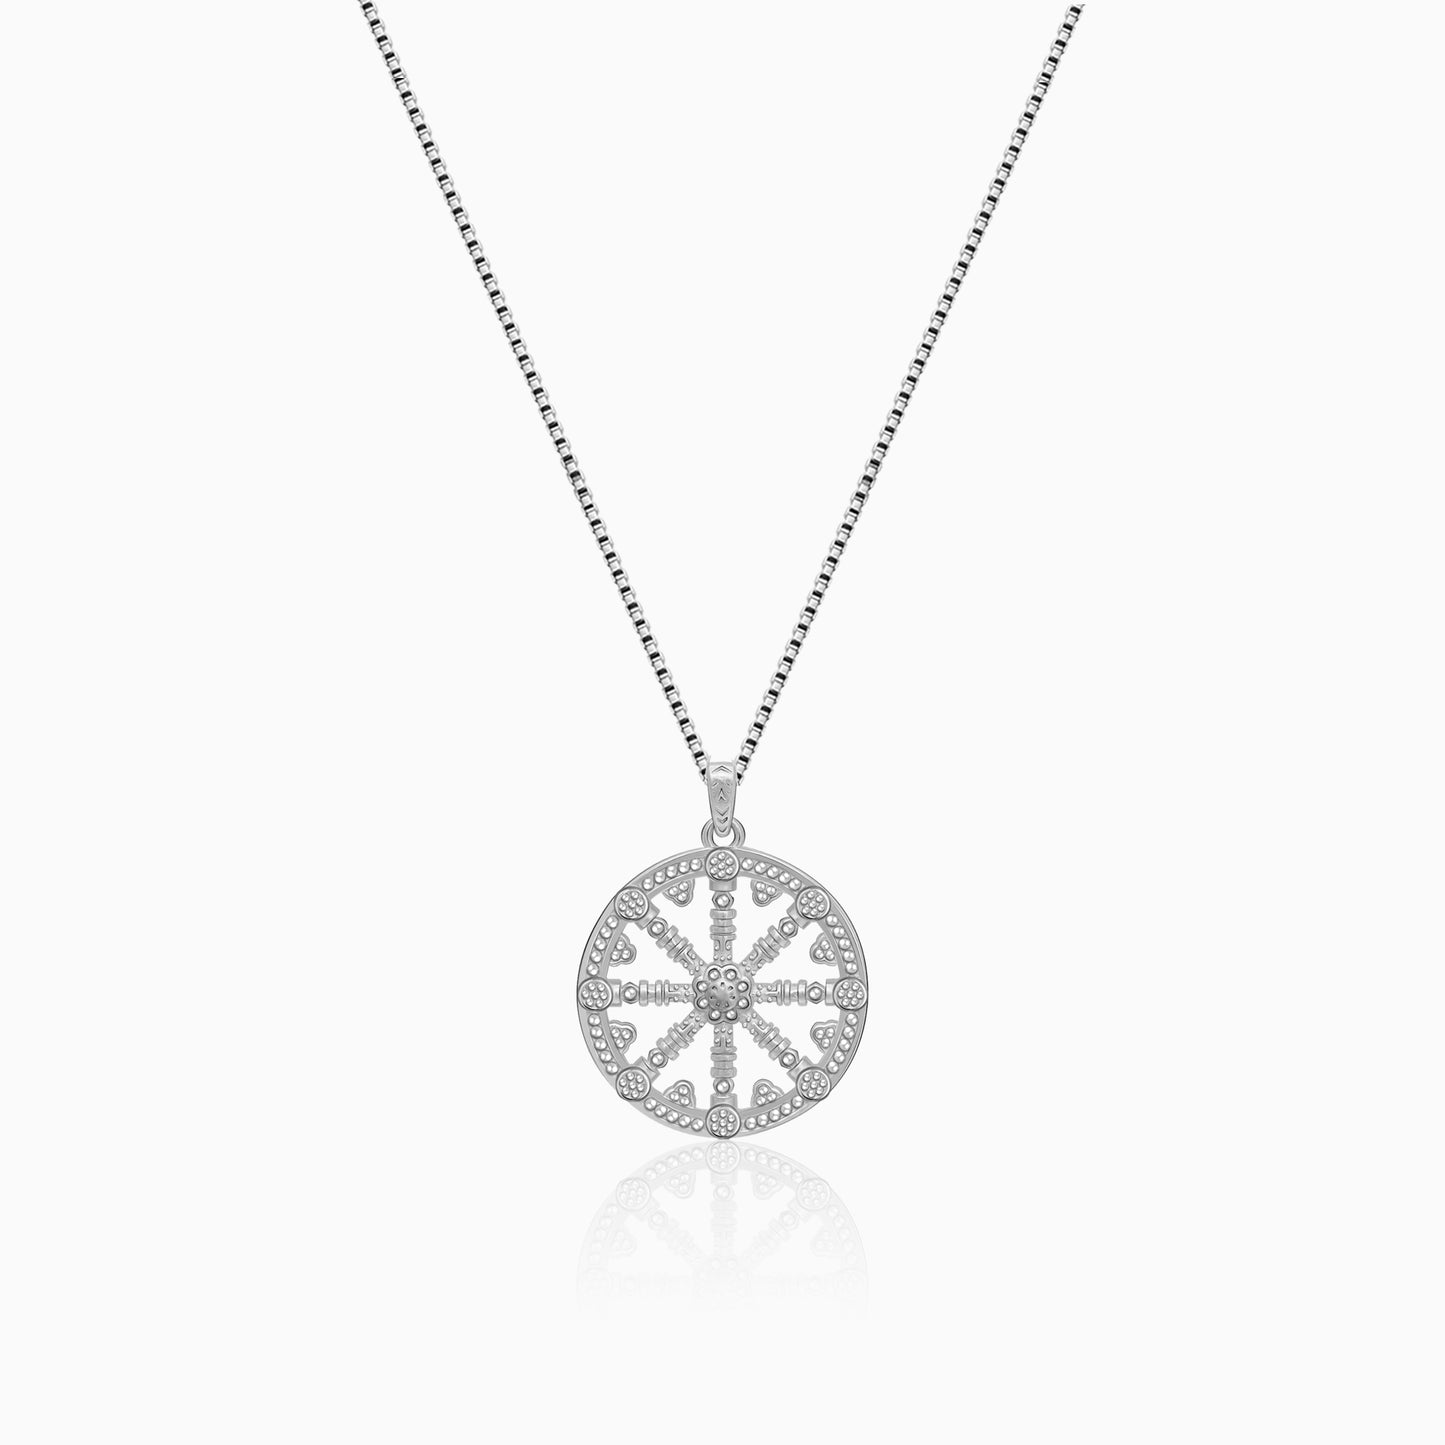 Silver Wheel Pendant With Link Chain For Him